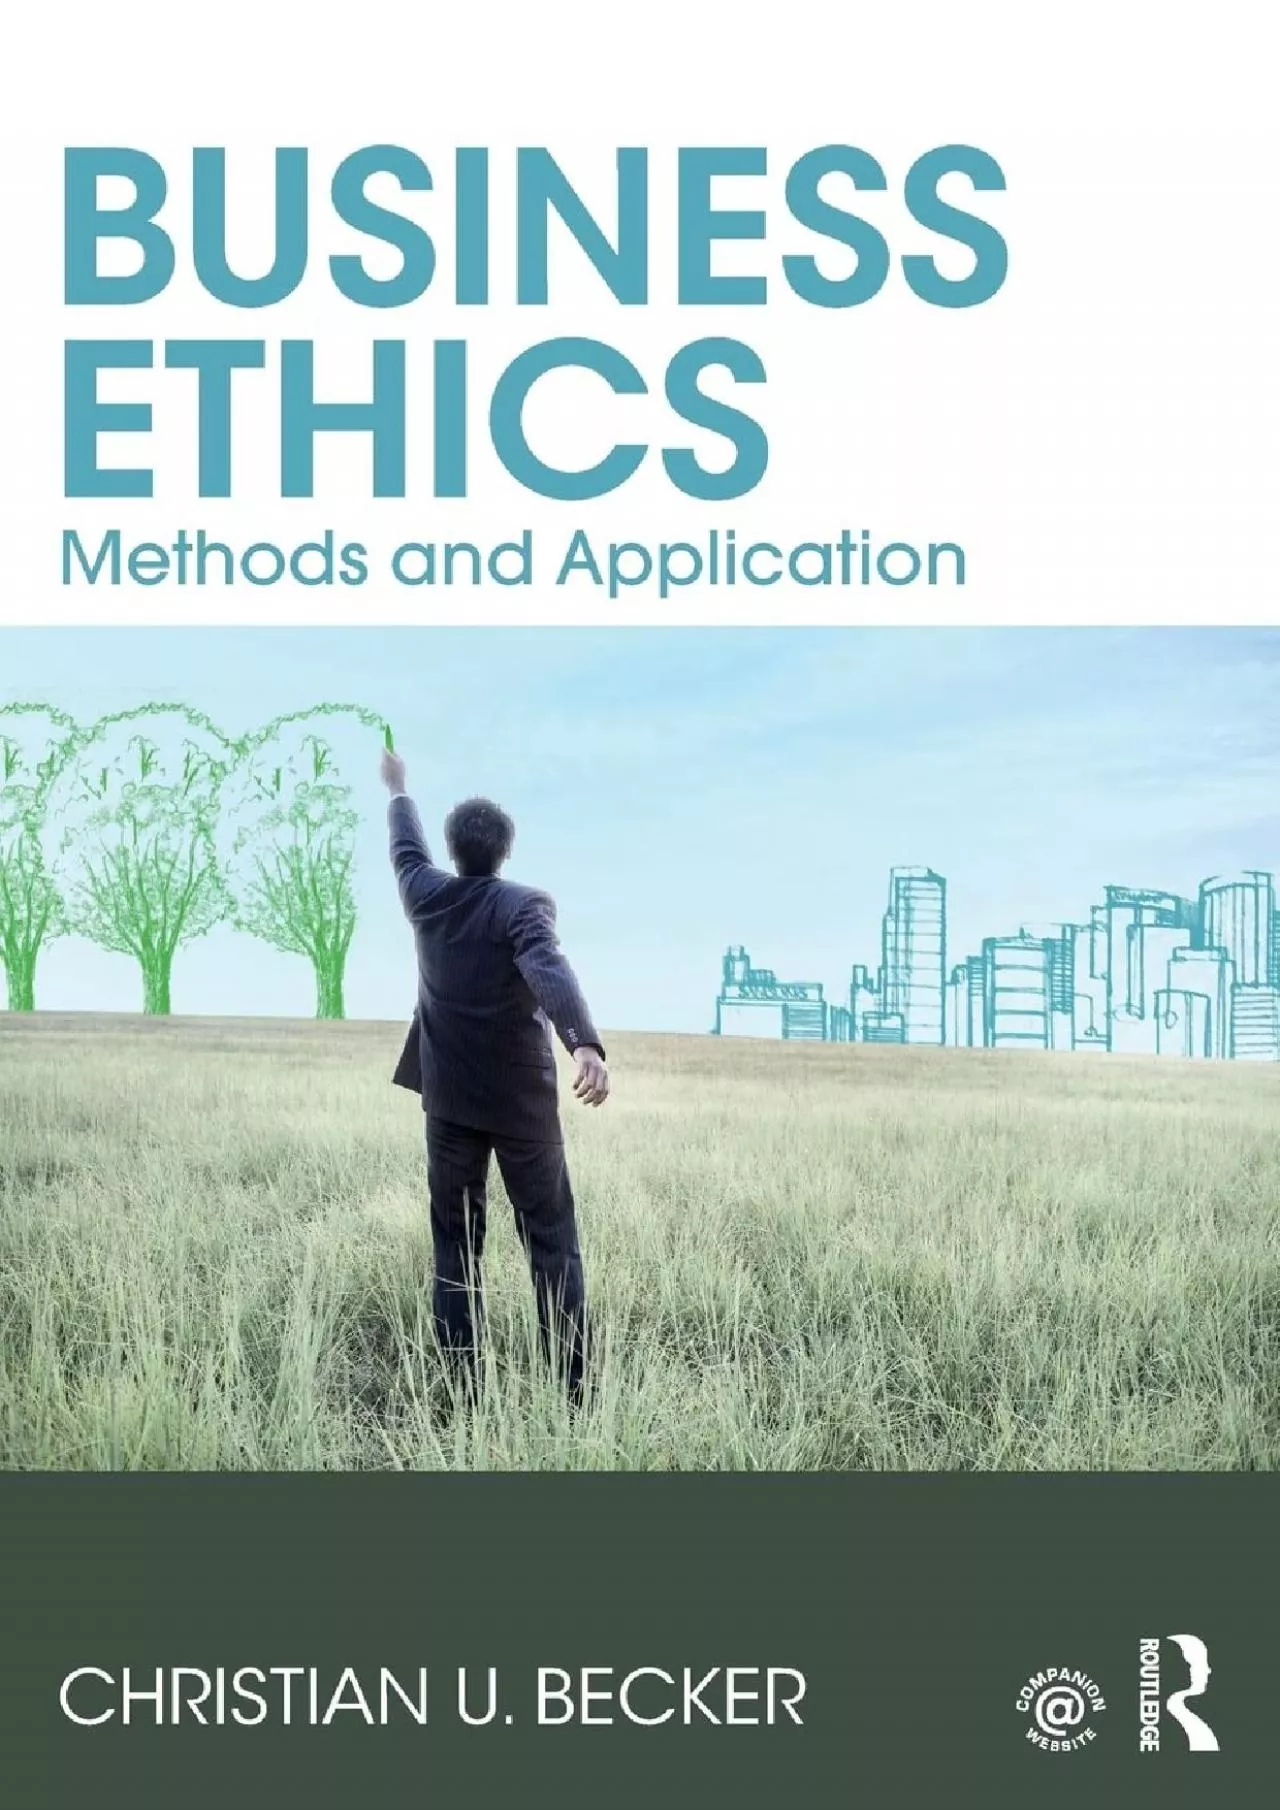 (BOOK)-Business Ethics: Methods and Application